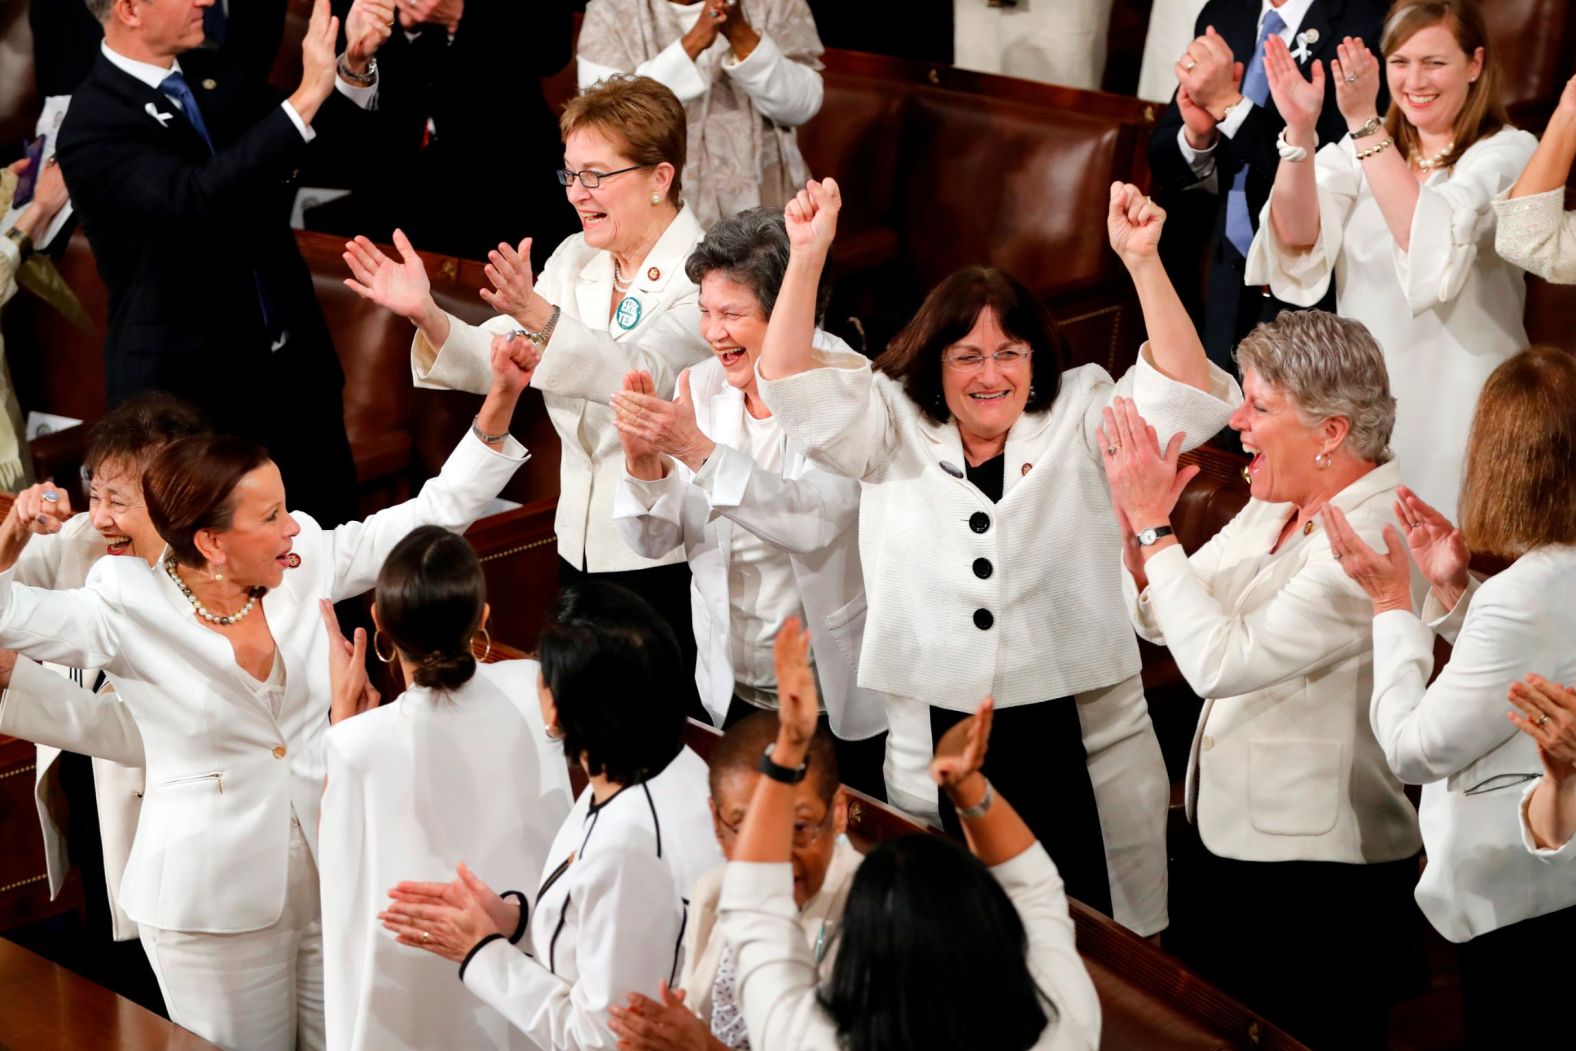 A group of Democratic women, dressed in all white, stands to cheer during a portion of Trump's speech. Trump was discussing women in the workforce when <a href="index.php?page=&url=https%3A%2F%2Fwww.cnn.com%2Fpolitics%2Flive-news%2Fstate-of-the-union-2019%2Fh_4e680e5b1a294458eaa78e48699aff82" target="_blank">the moment</a> happened. "No one has benefited more from a thriving economy than women who have filled 58% of the newly created jobs last year," Trump said. After the Democrats stood up, Trump joked: "You weren't supposed to do that. Thank you very much." The House Democratic Women's Working Group had invited female members of both parties to wear white<a href="index.php?page=&url=https%3A%2F%2Fwww.cnn.com%2Fpolitics%2Flive-news%2Fstate-of-the-union-2019%2Fh_478ac94322e9c1323a7b902ba3b5e0a2" target="_blank"> as a symbol of solidarity.</a>